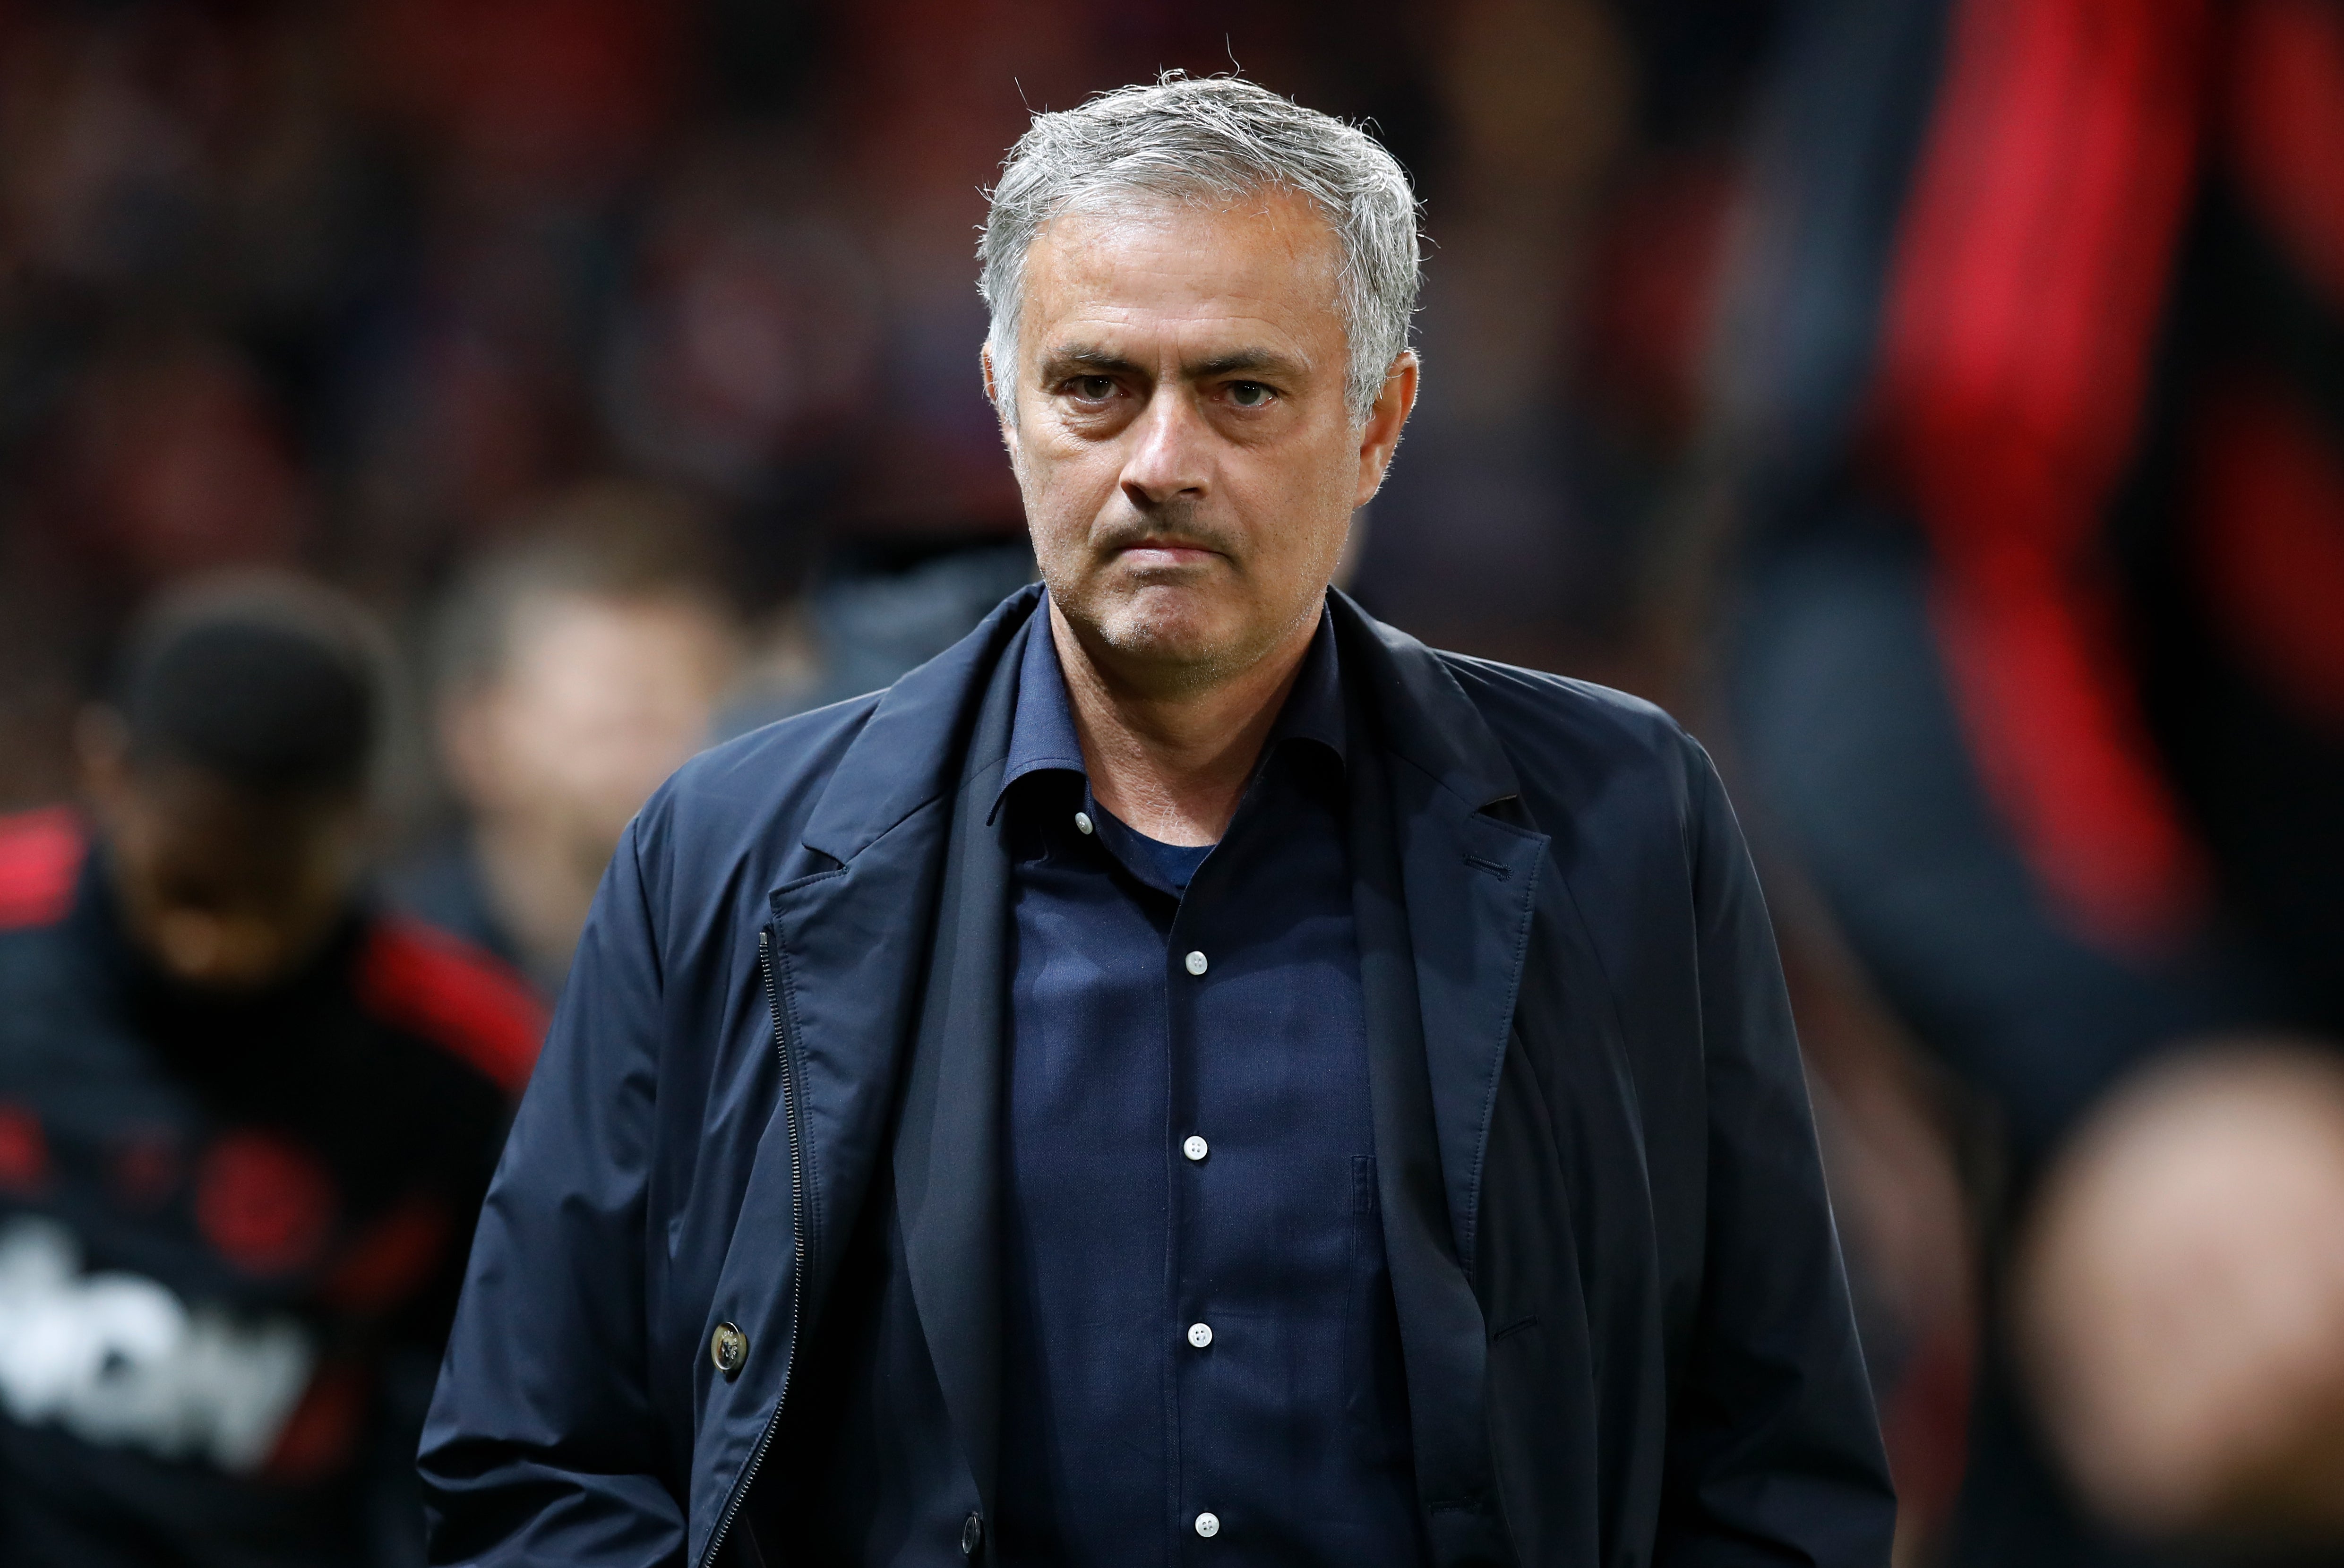 Jose Mourinho was unable to bring the Premier League title back to Manchester United (Martin Rickett/PA)